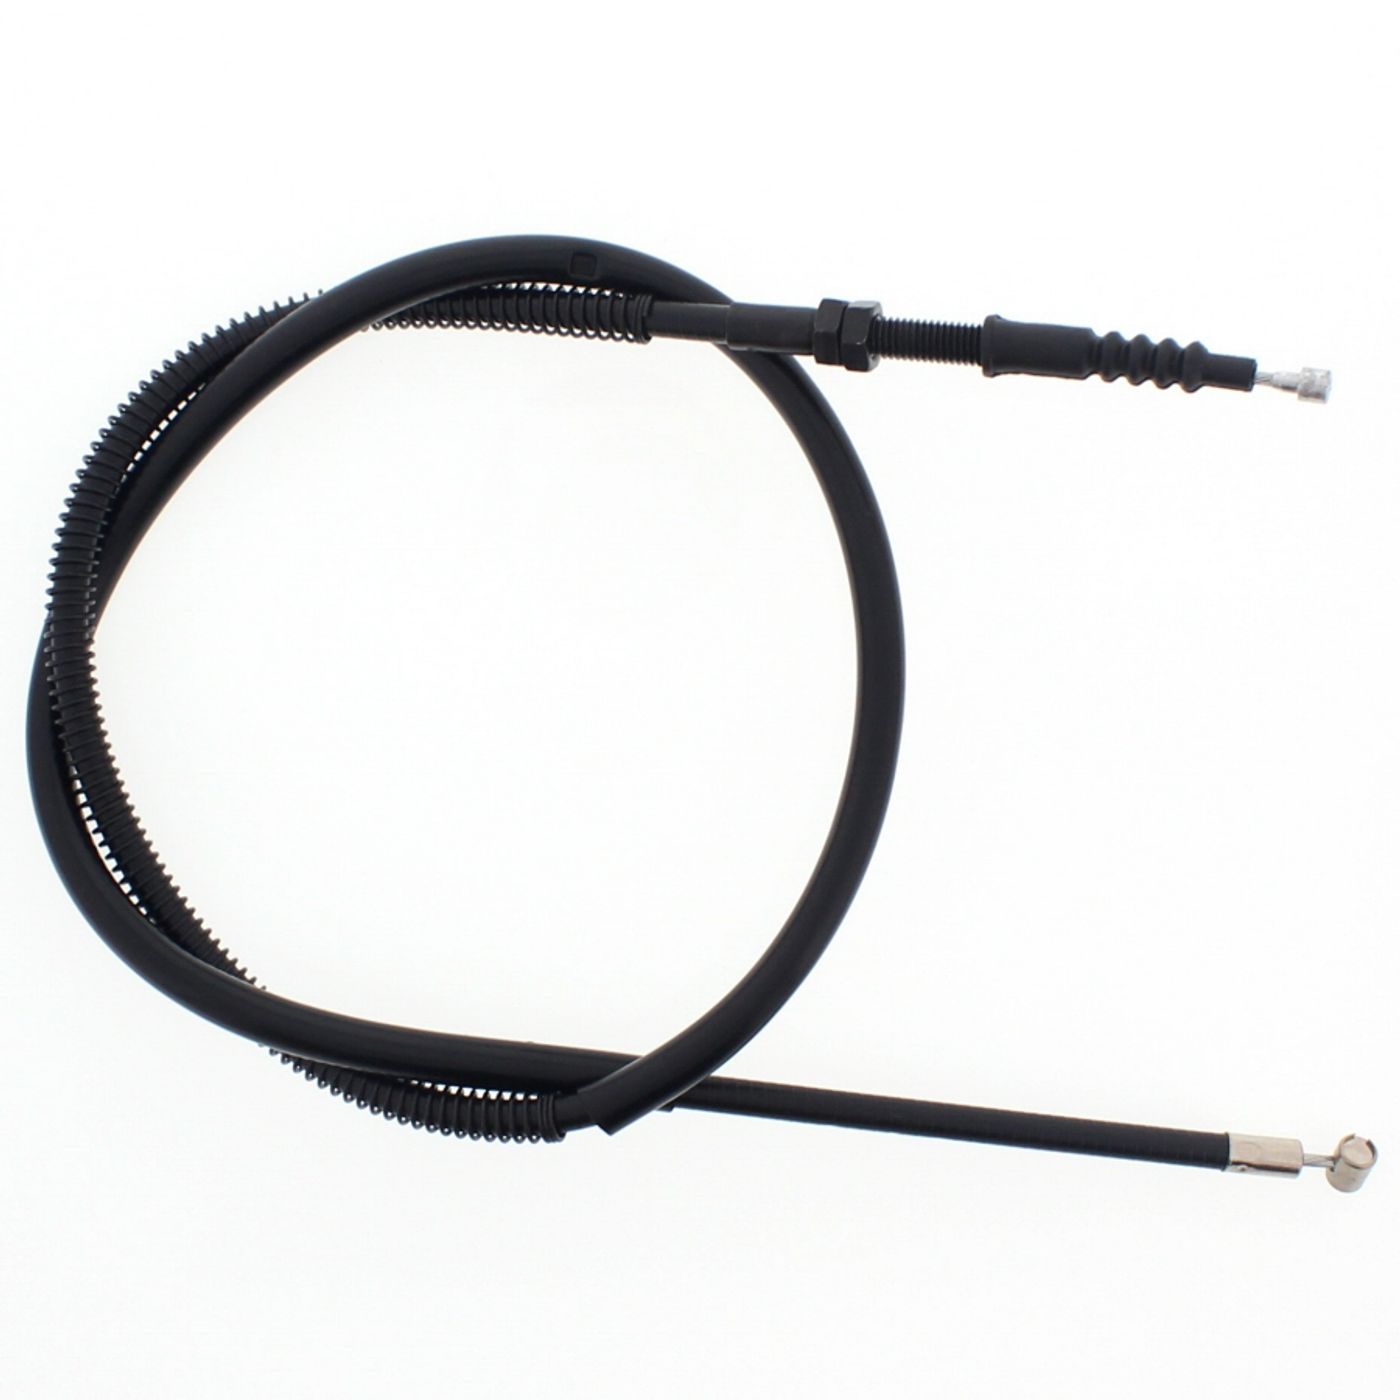 Wrp Clutch Cables - WRP452025 image